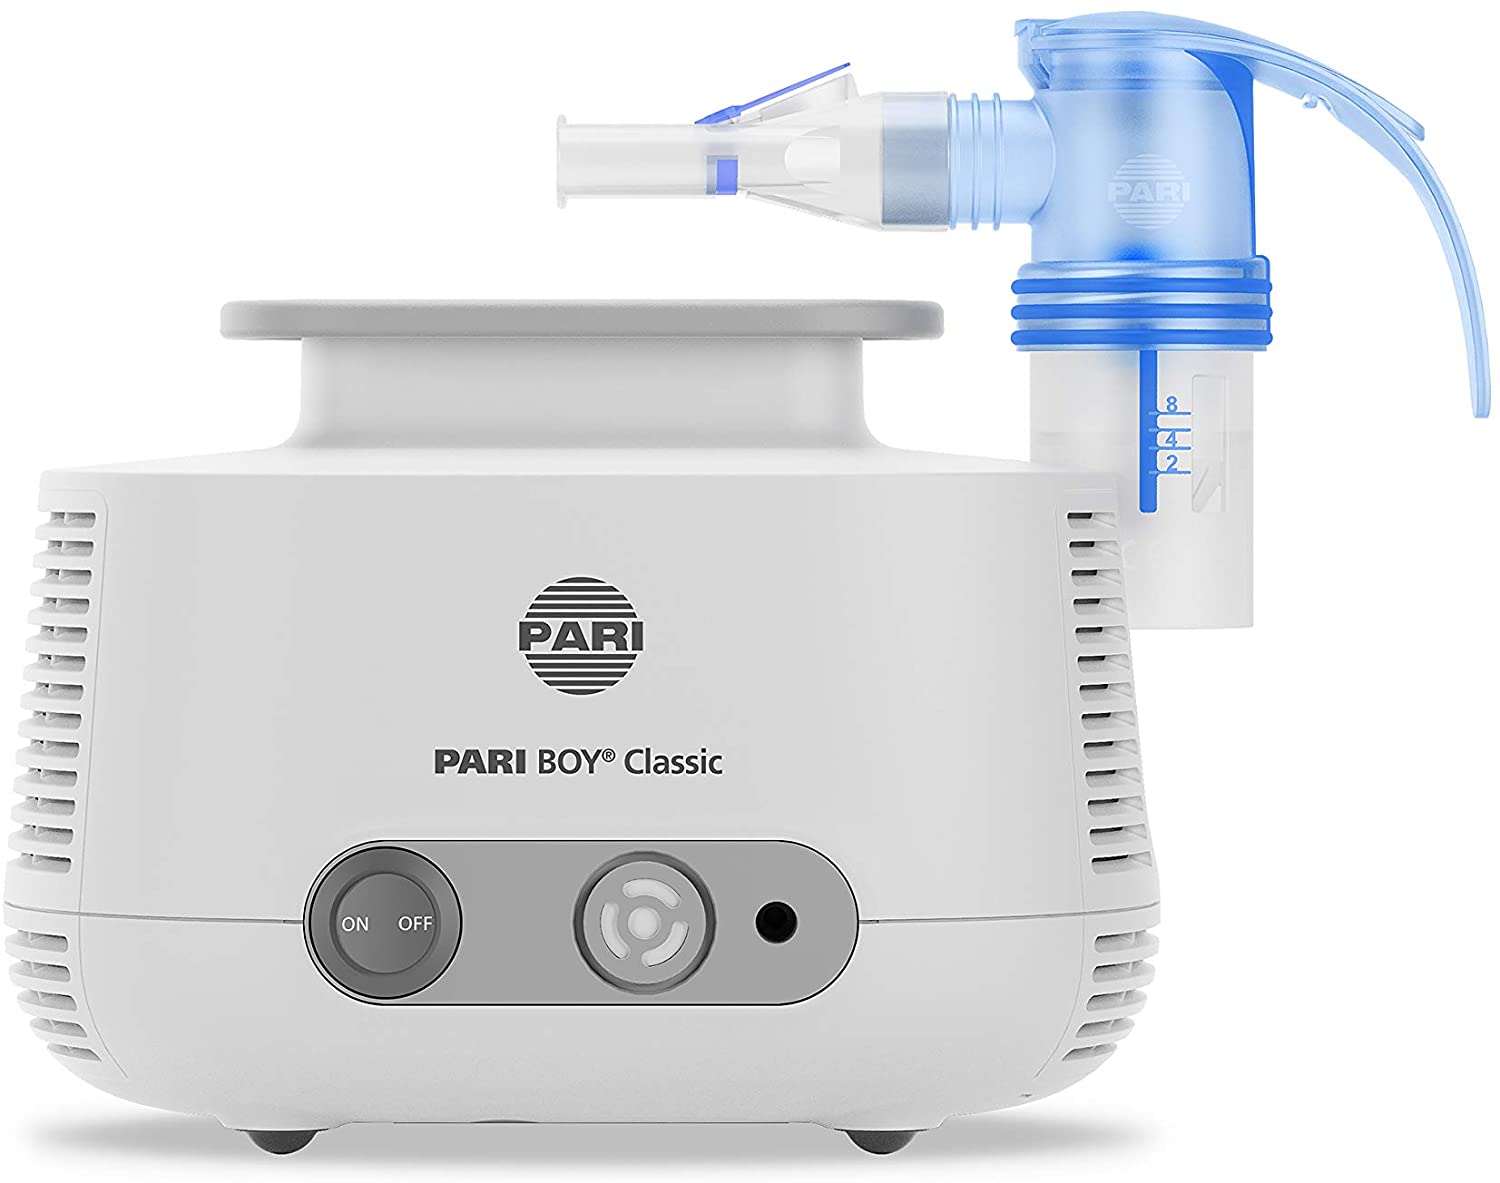 Pari 130G1200 Boy Classic, inhaler for the treatment of respiratory diseases, for children from 4 years and adults Single